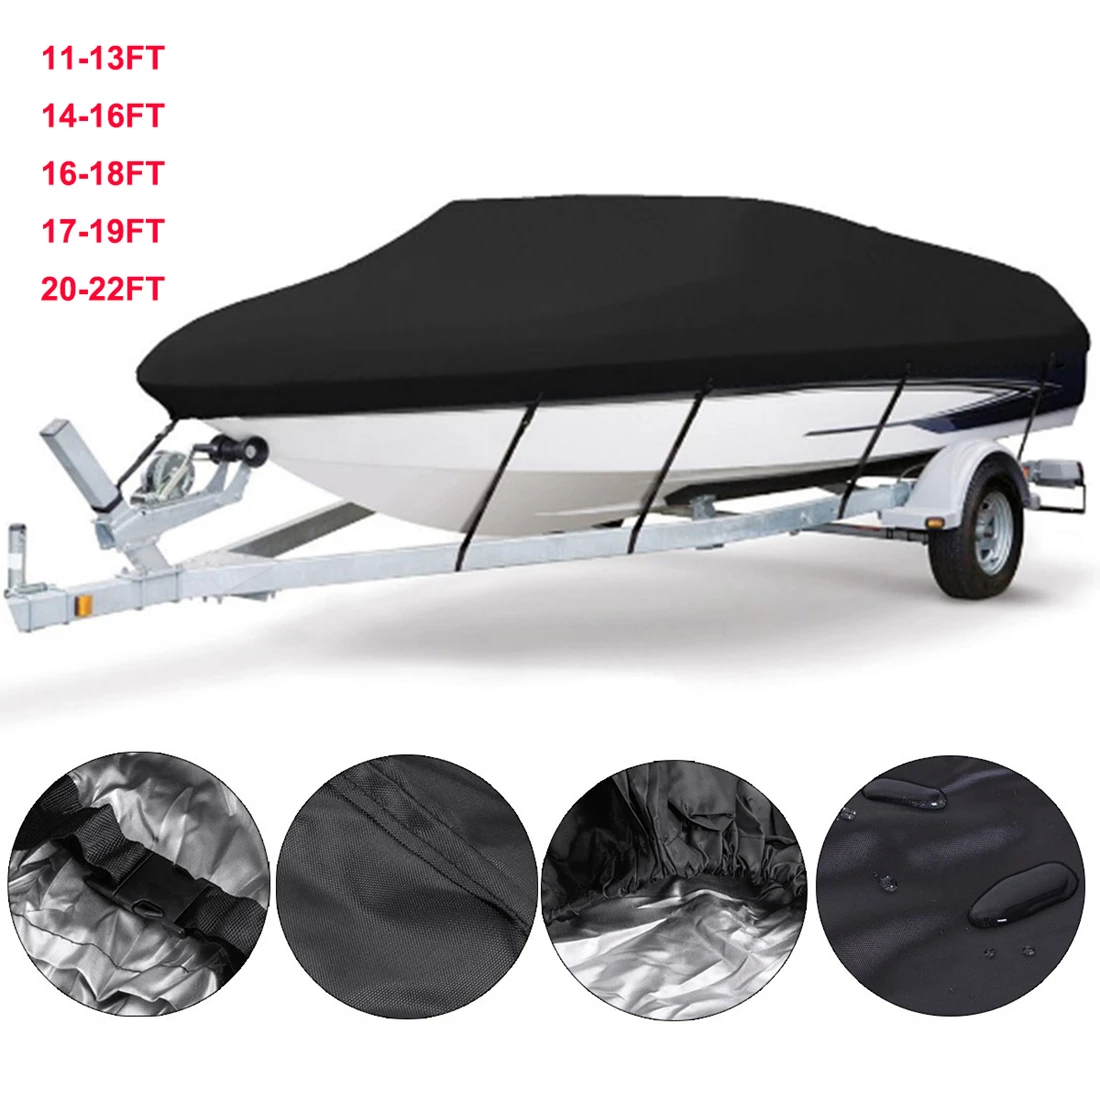 210D Boat Cover 11-22ft Fabric Trailerable Yacht Marine V-shape Canvas Boat Covers Anti-UV Waterproof Fishing Boat Cover Tent